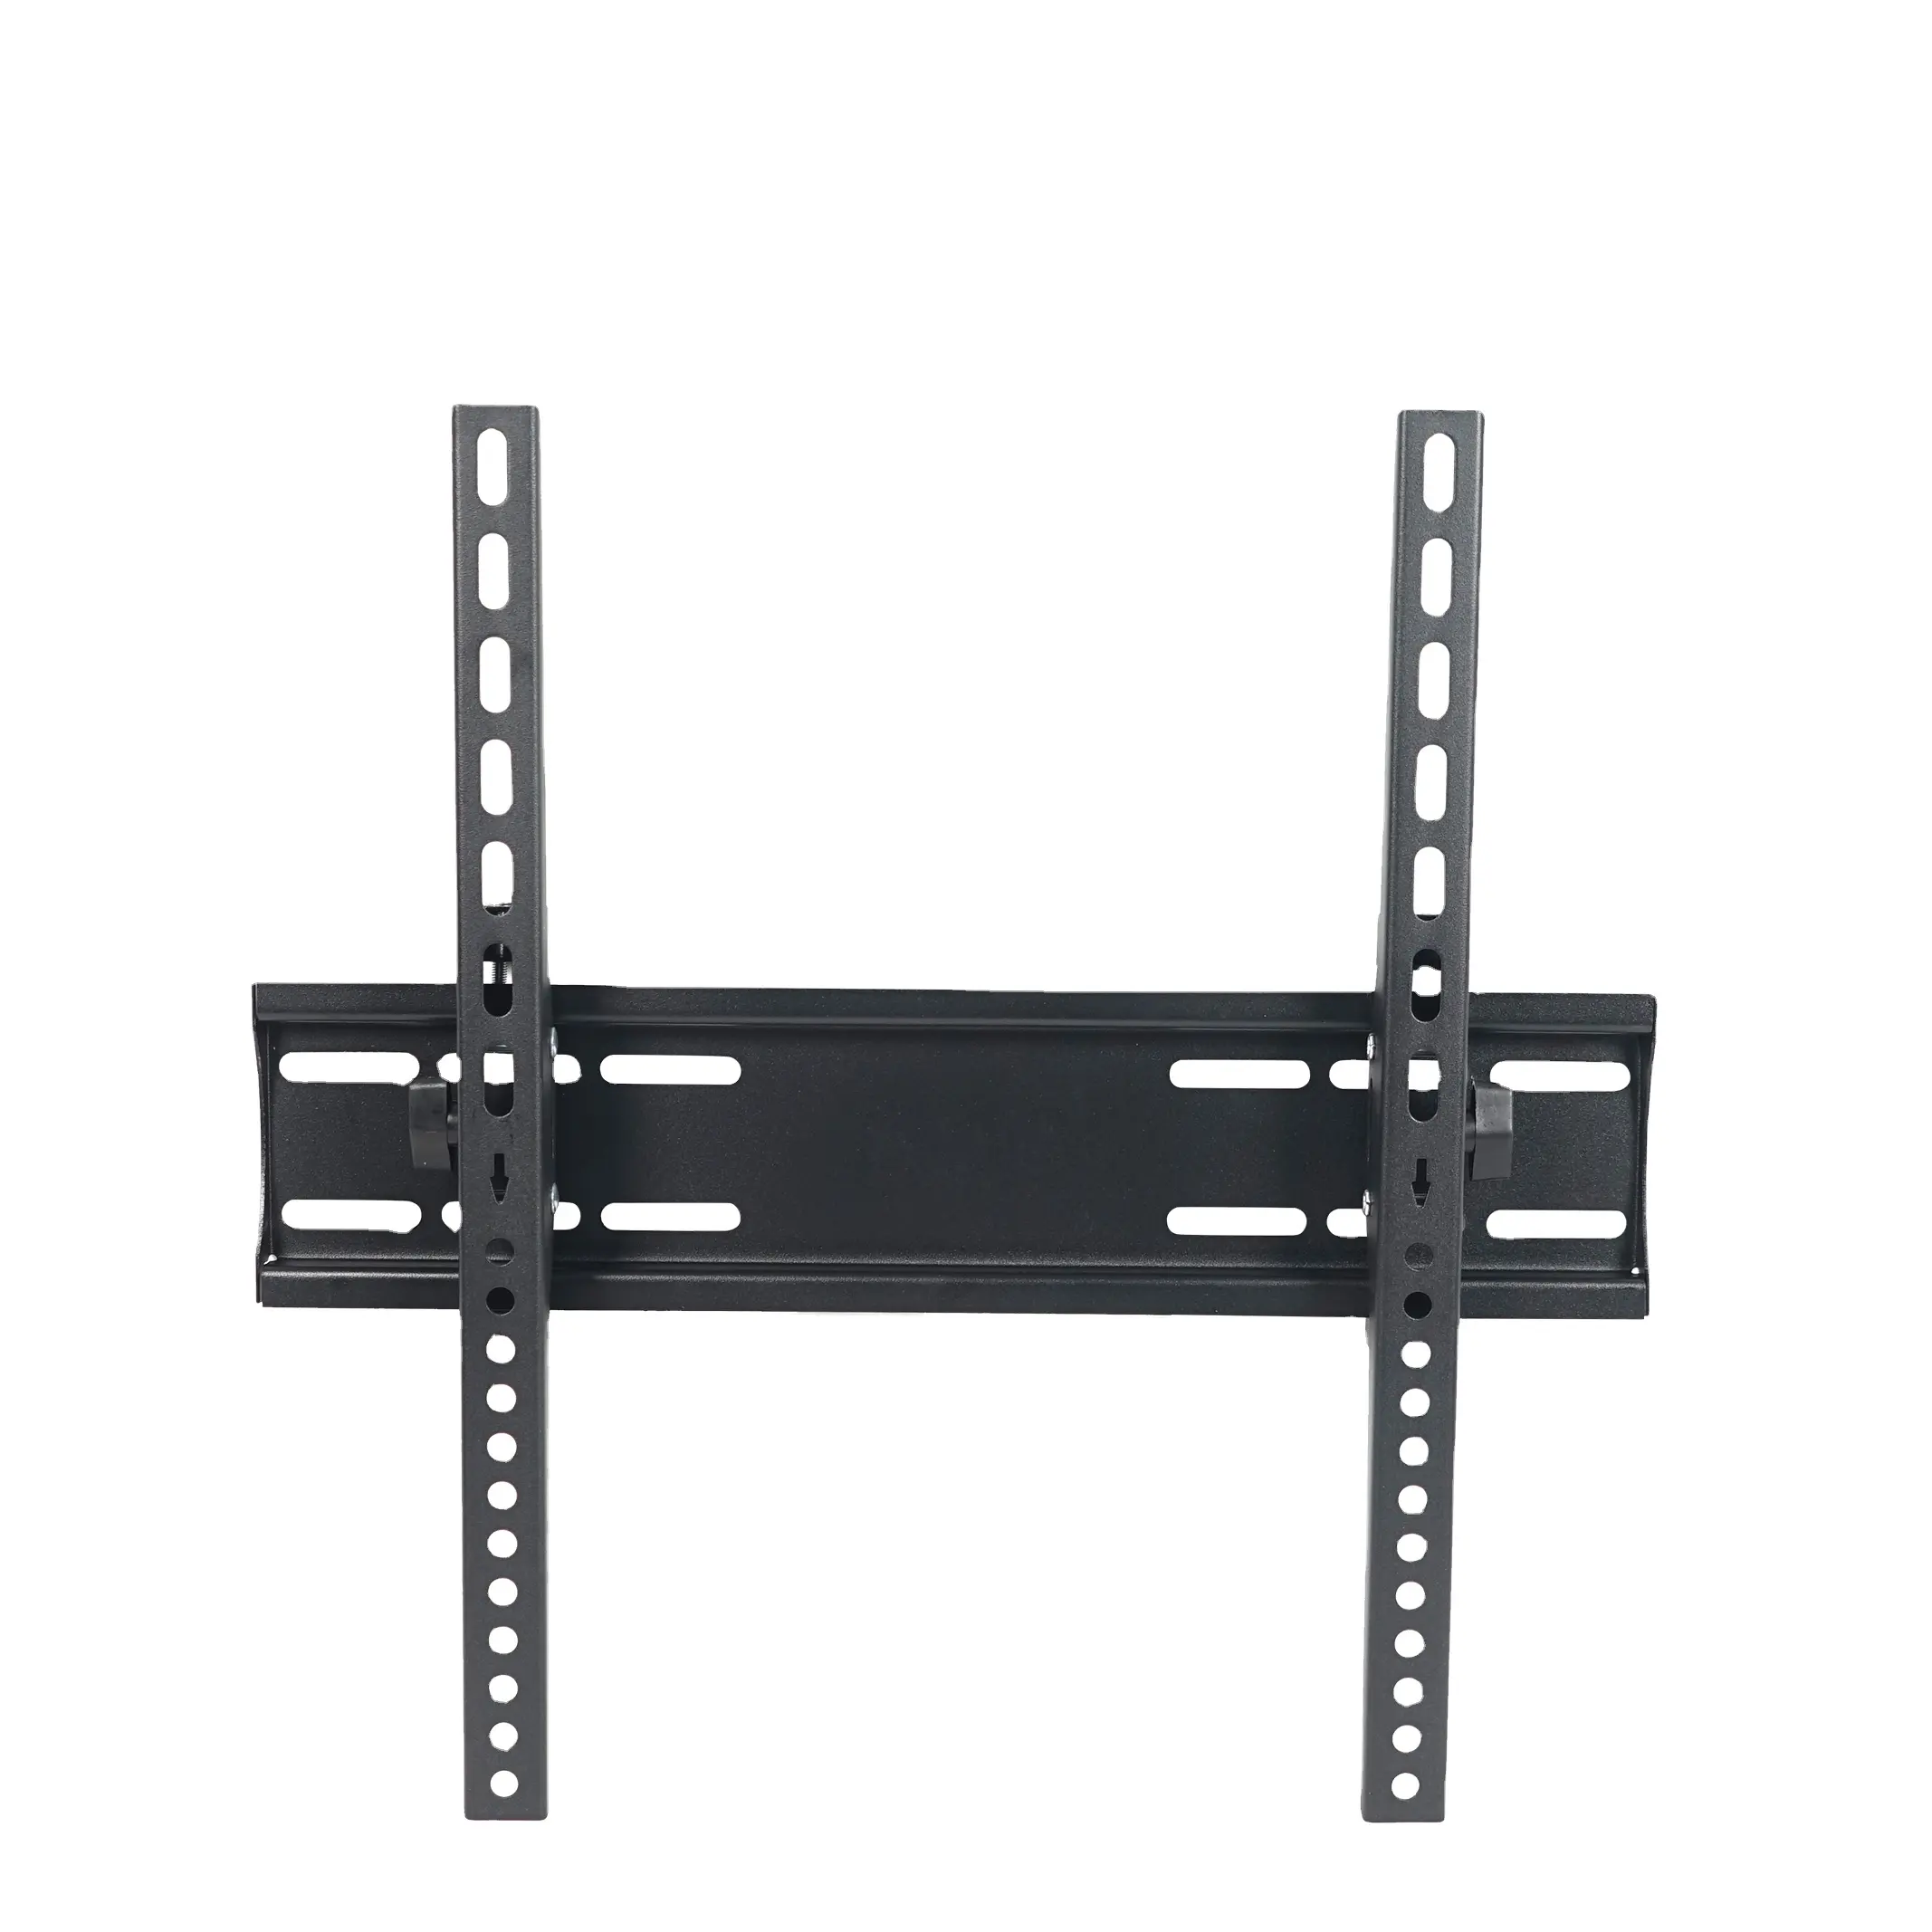 Single LCD Monitor Desk Mount Stand With Gas Spring Fully Adjustable/Tilt/Articulating For 1 Screen Up To 27"